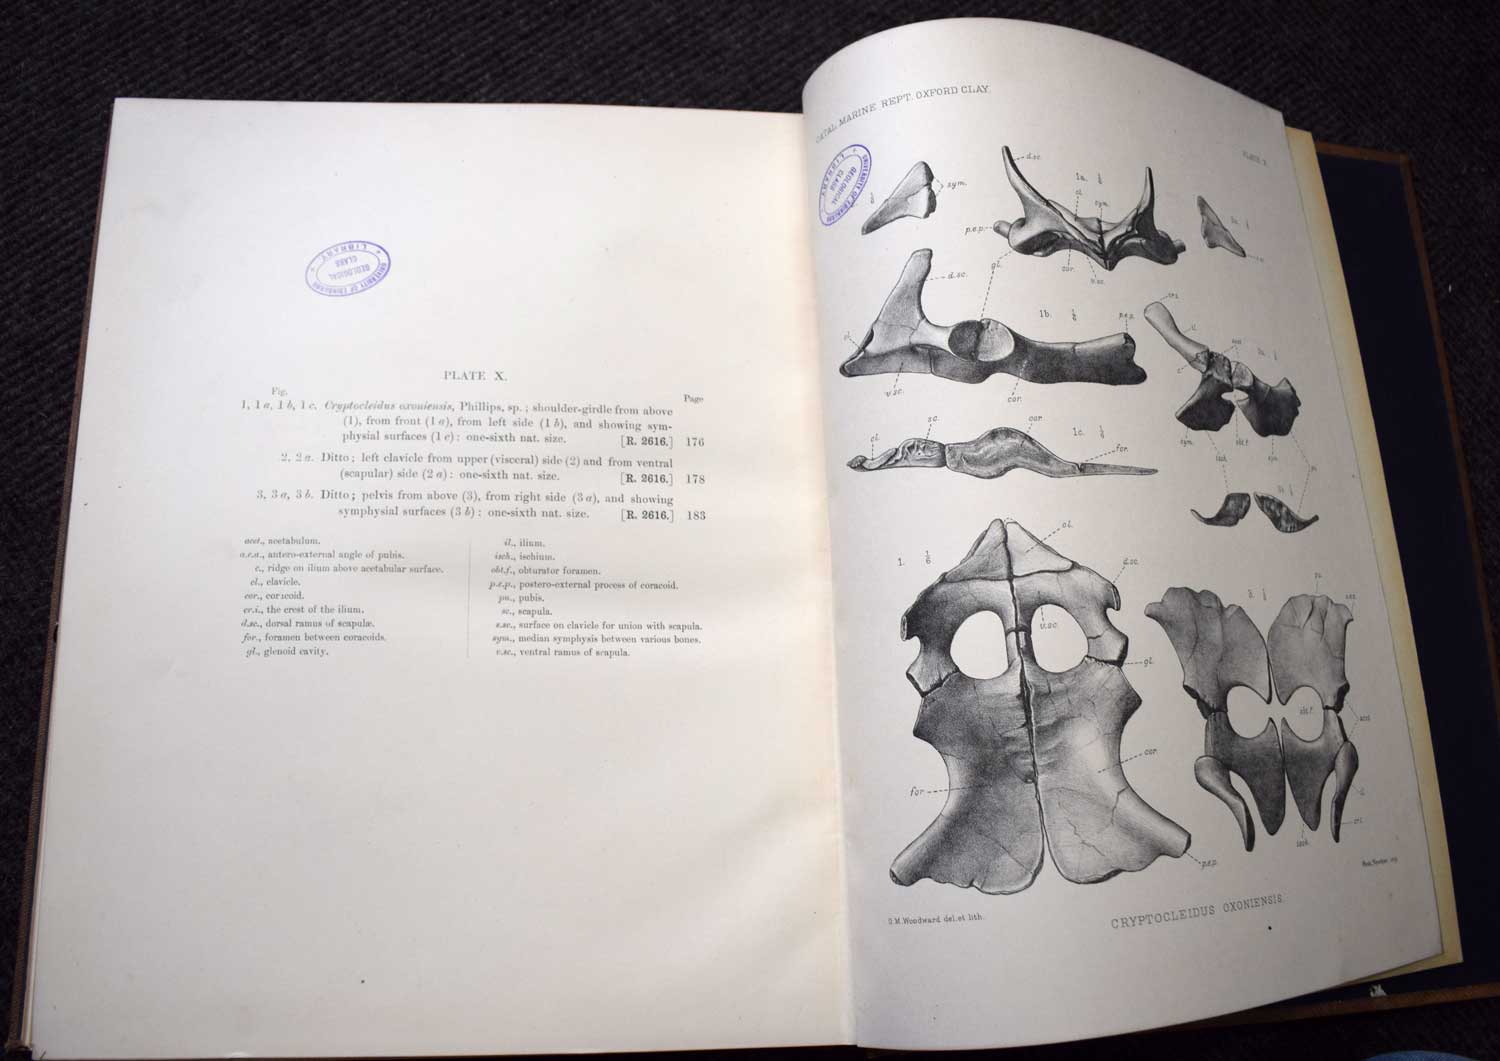 A Descriptive Catalogue of Marine Reptiles of the Oxford Clay (in 2 volumes).